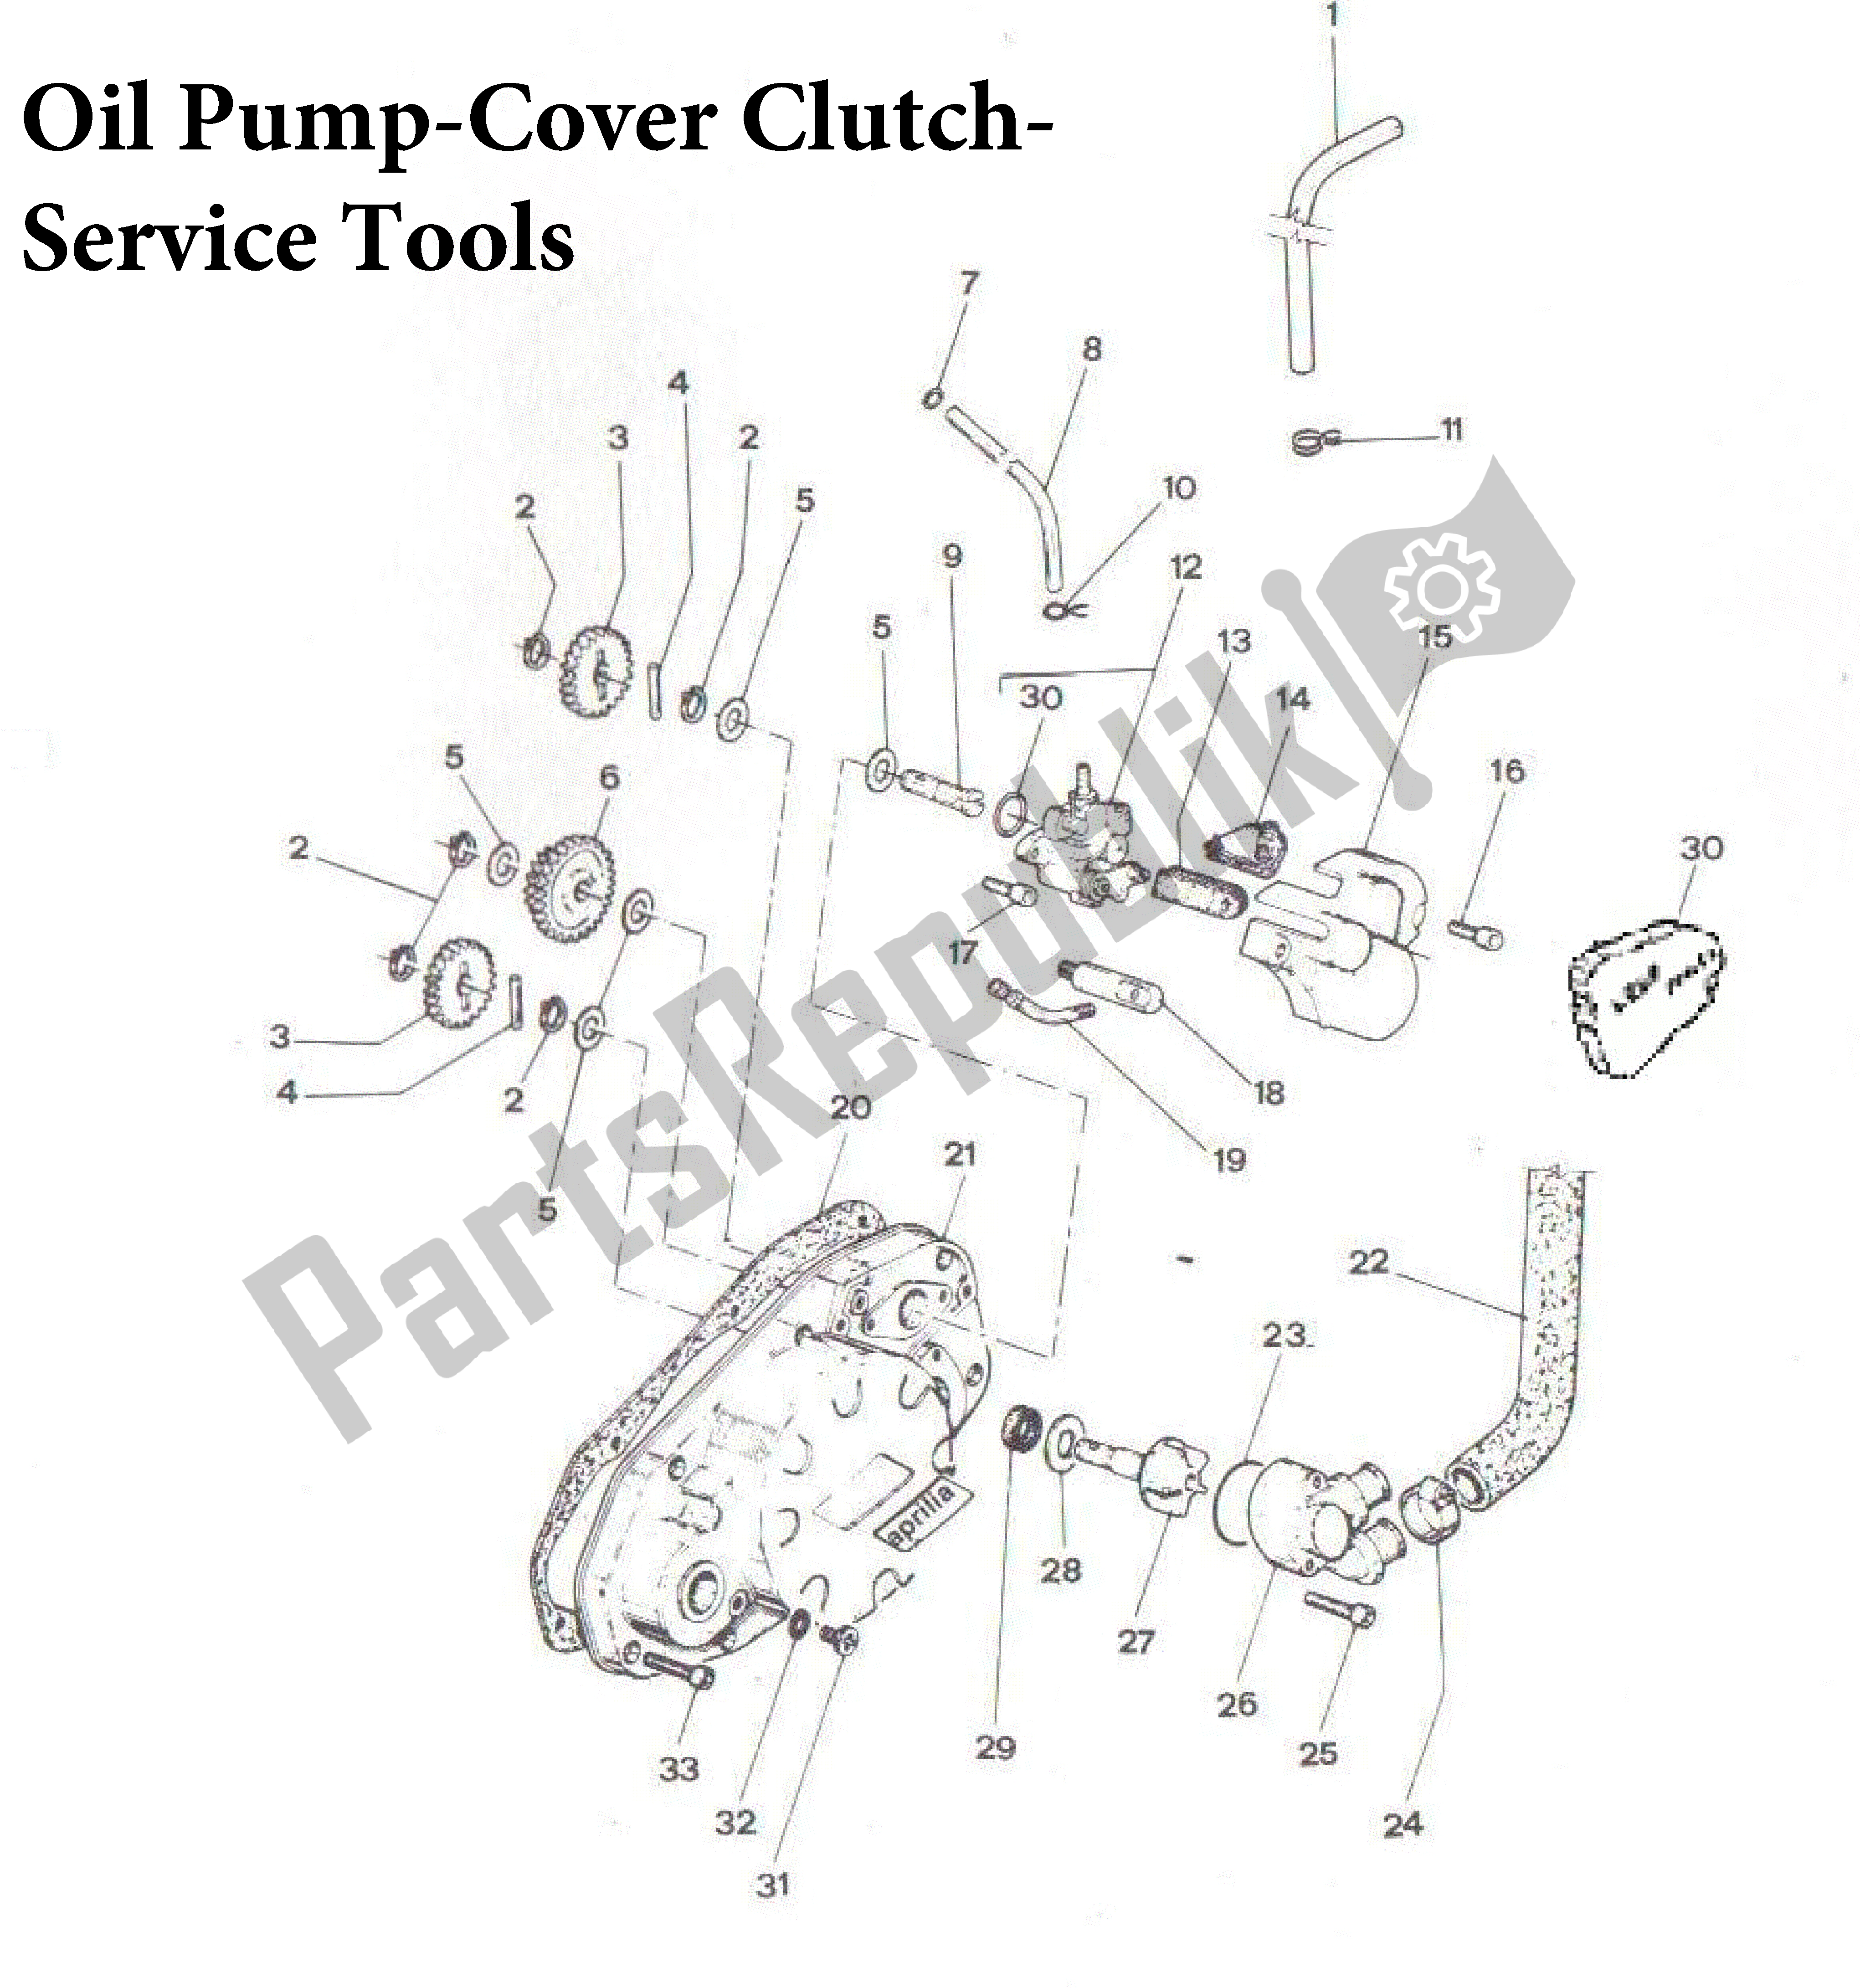 All parts for the Oil Pump-cover Clutch-service Tools of the Aprilia Sonic 50 1998 - 2001